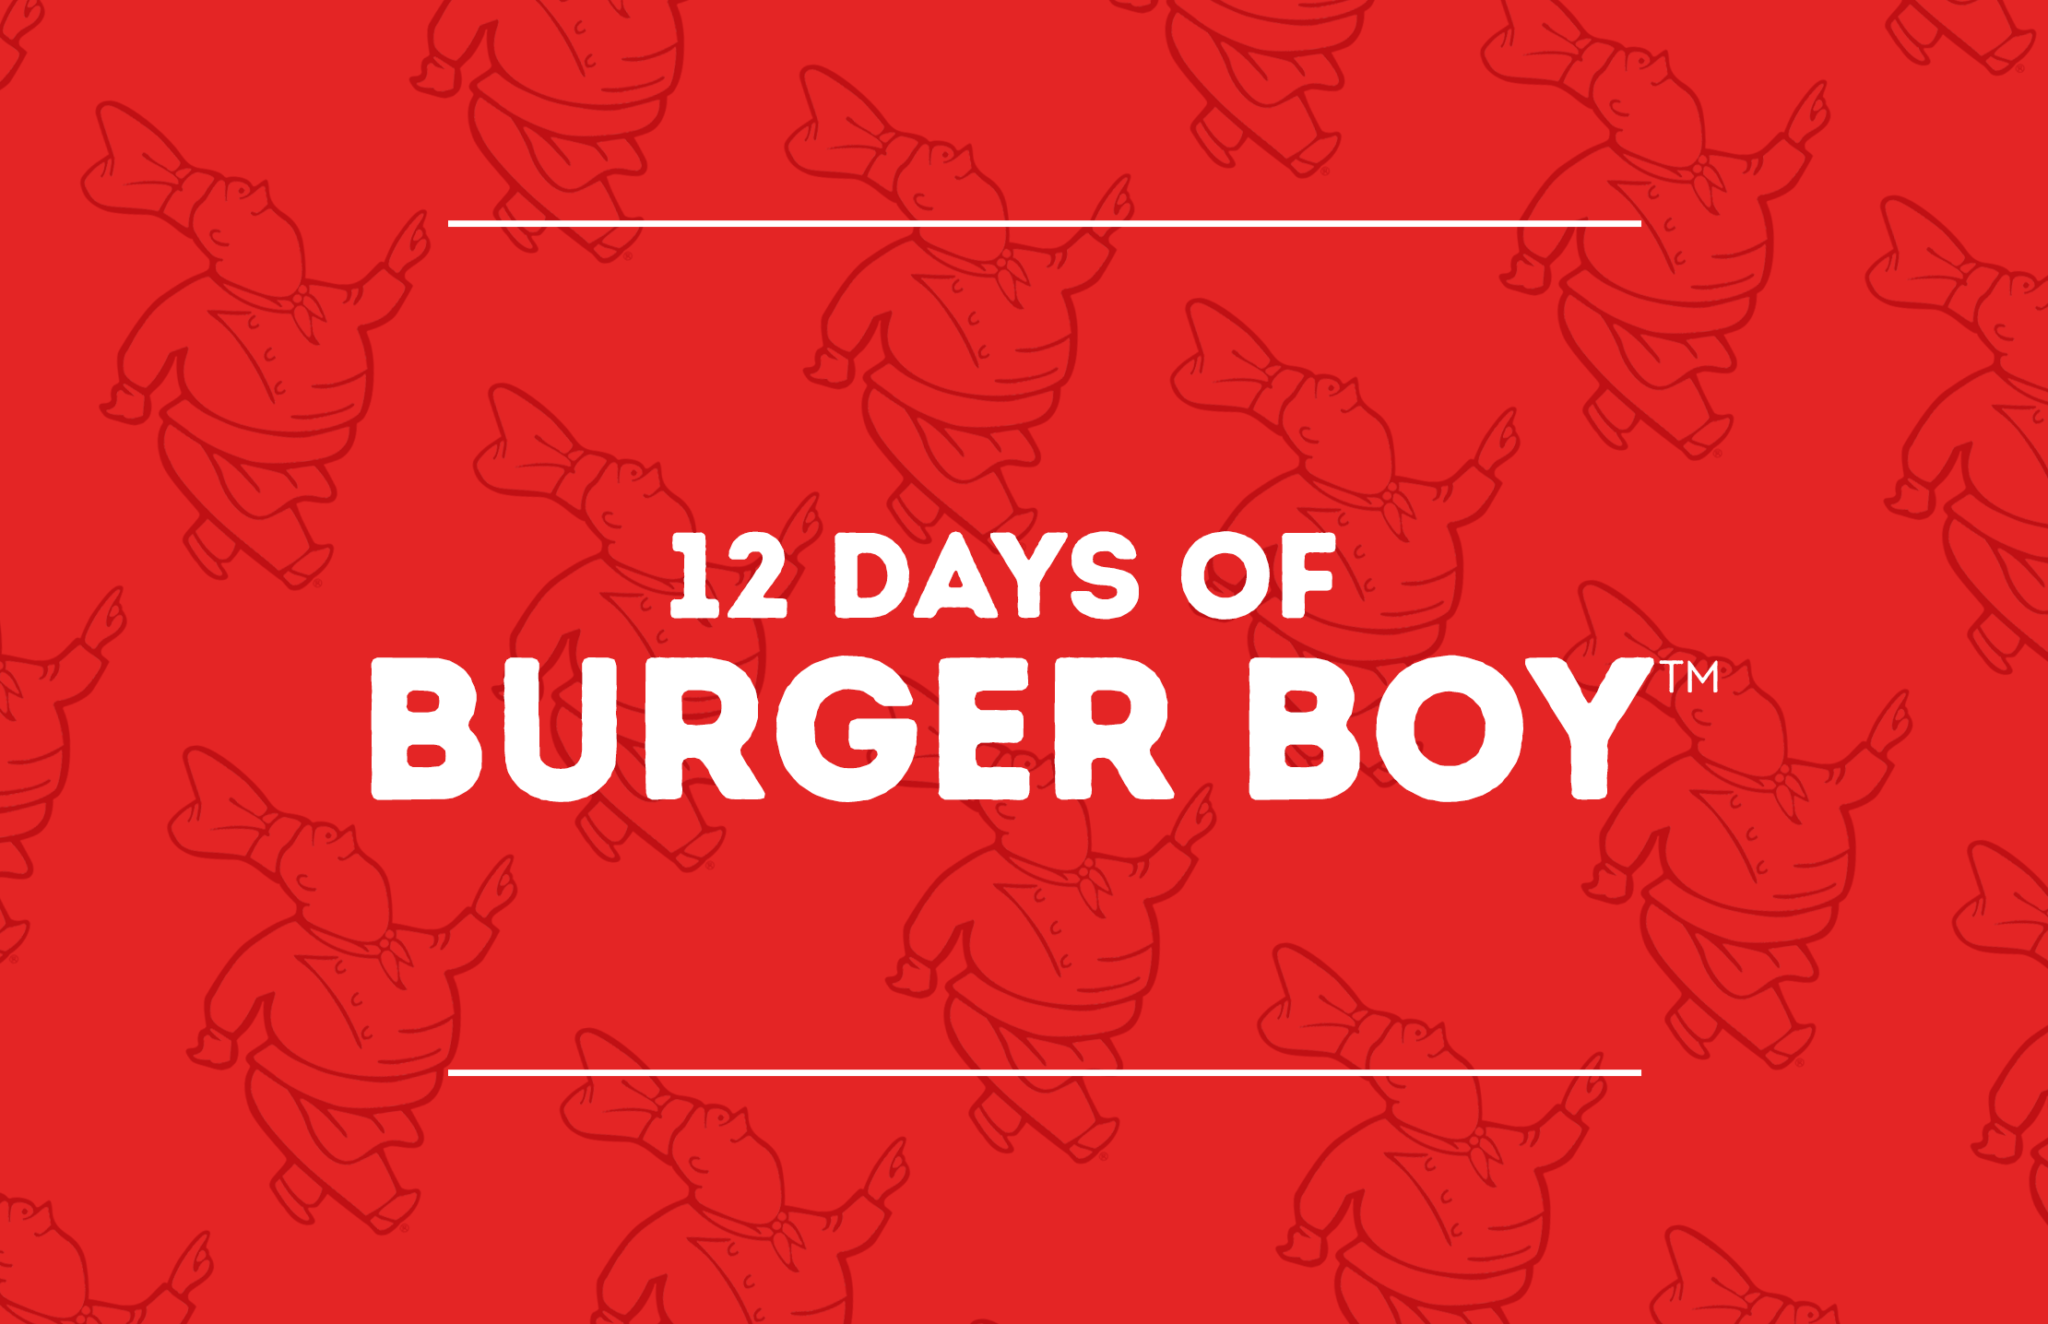 The 12 Days of Burger Boy Giveaway Returns this Holiday Season! 🎅🎄